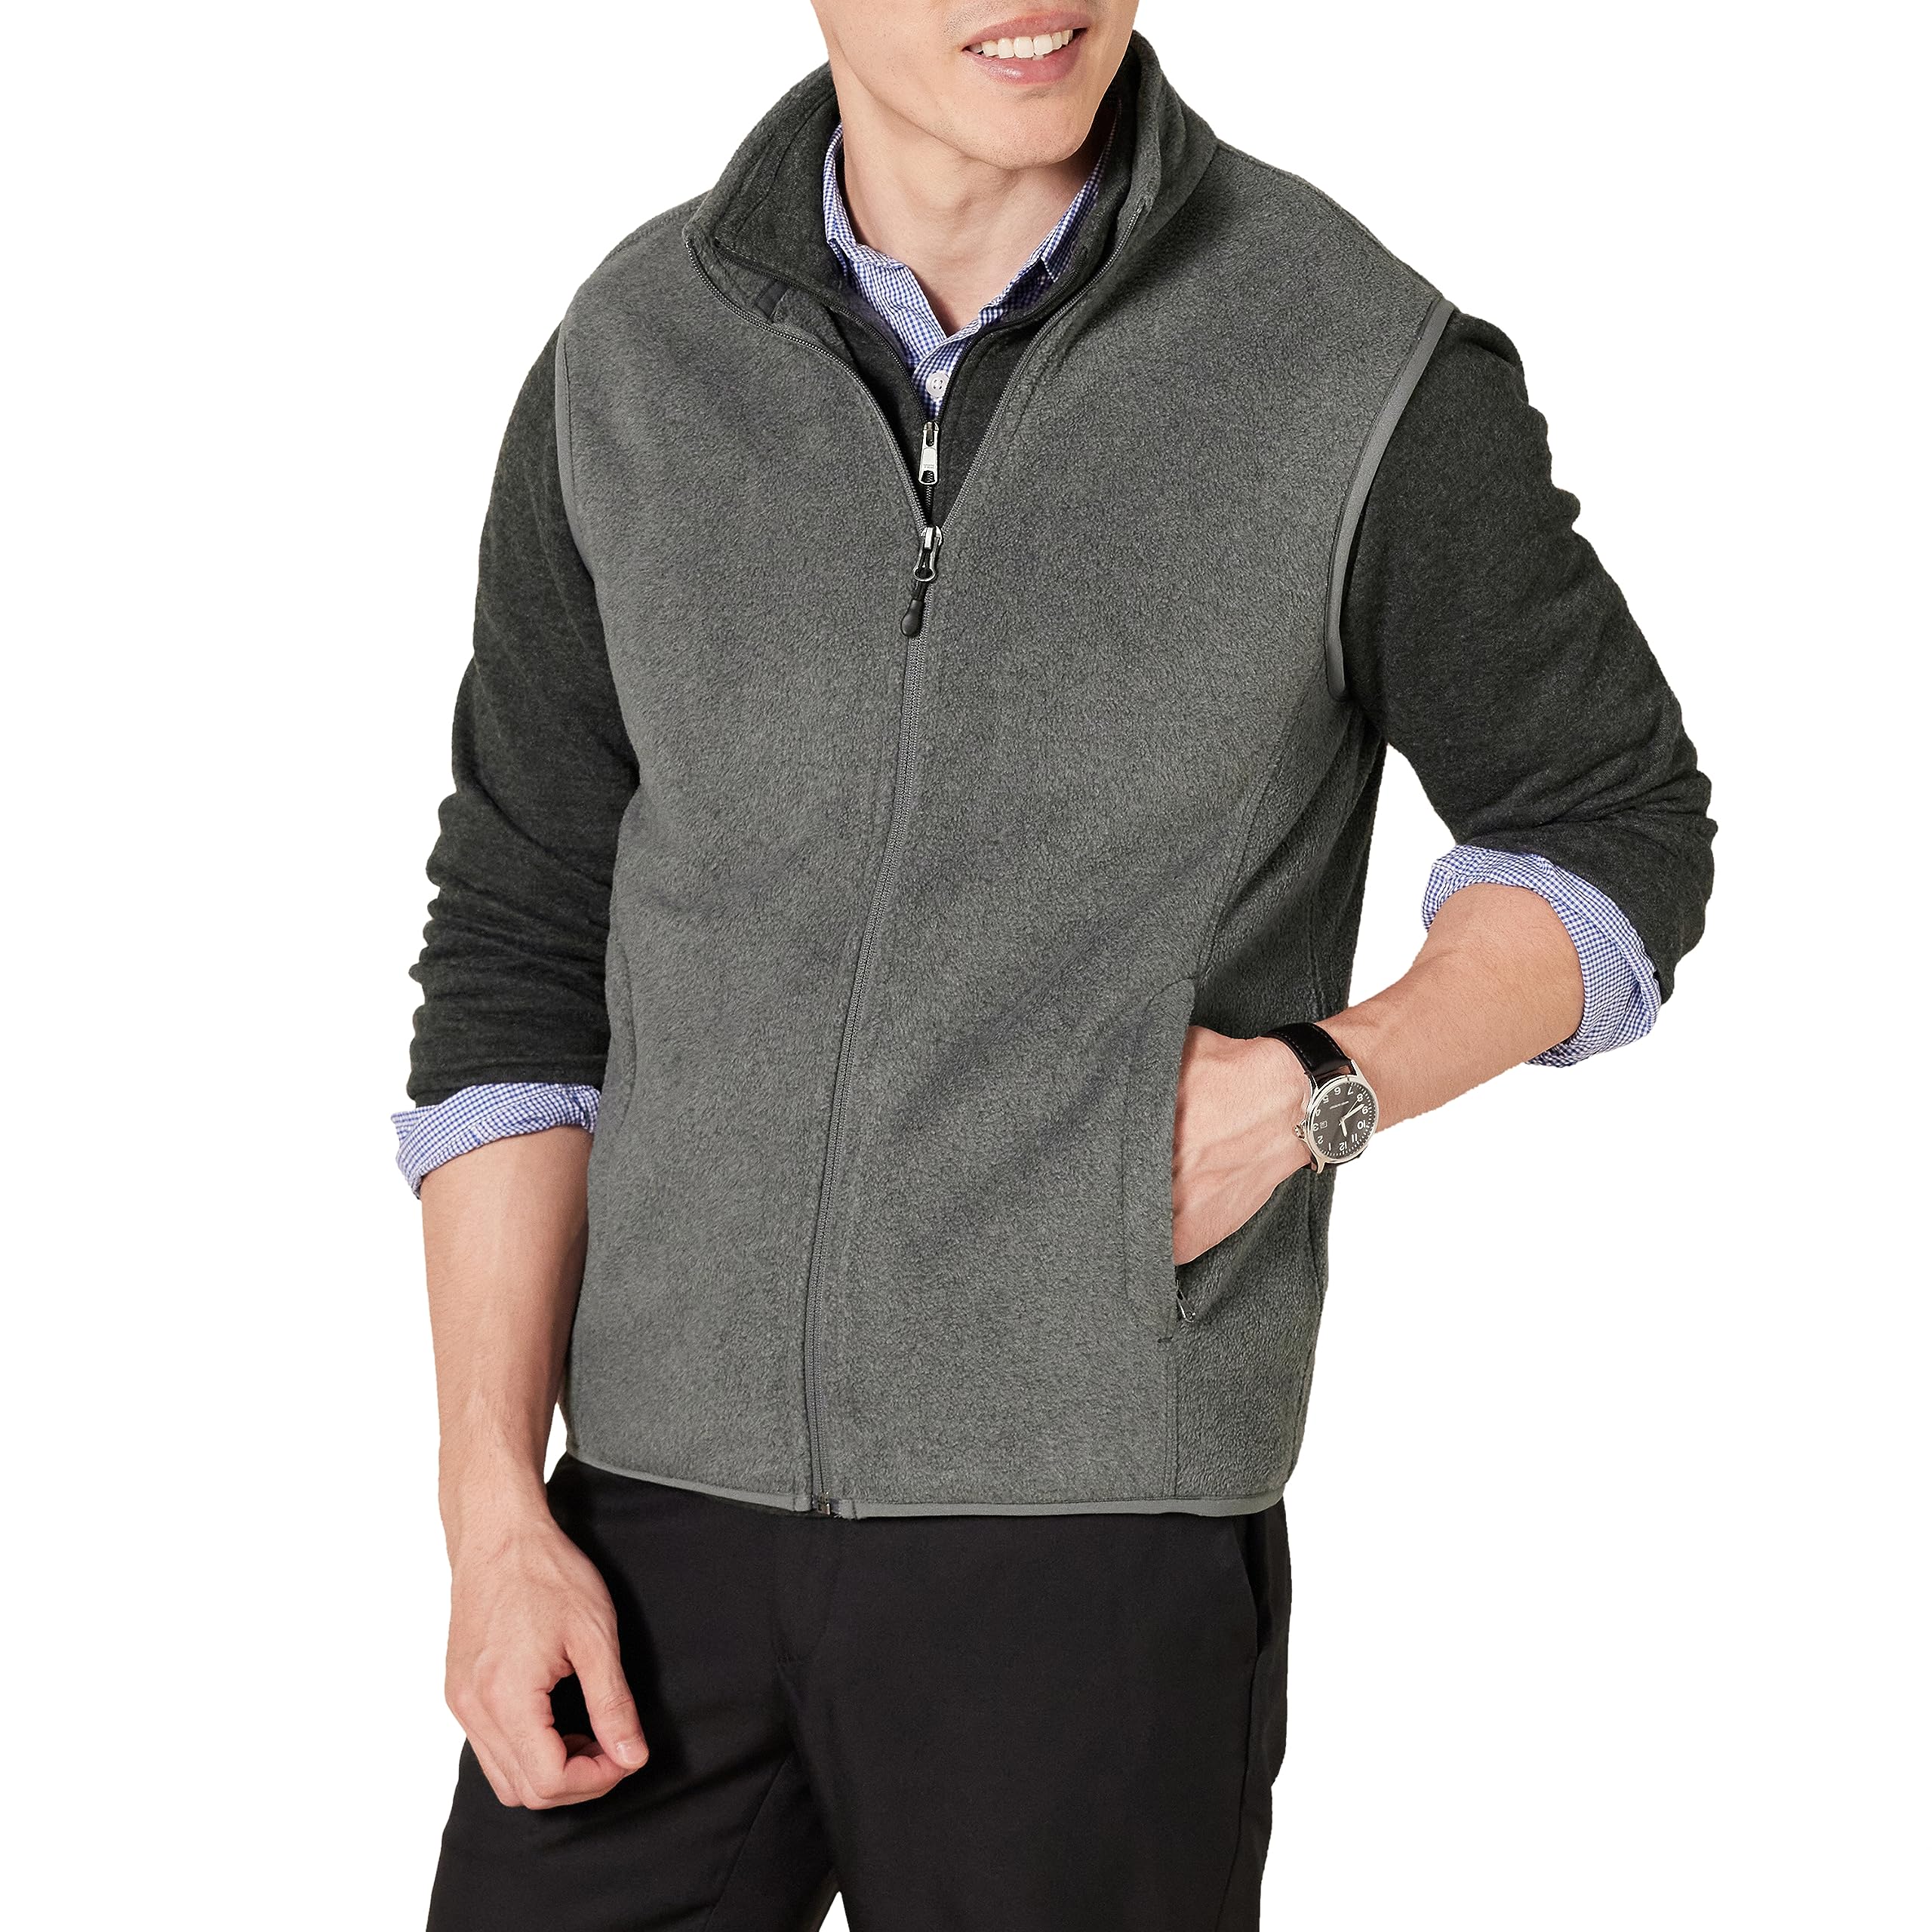 Amazon Essentials Men's Full-Zip Polar Fleece Vest (Various Colors, Sizes: XS, S, & L) from $7.40 + Free Shipping w/ Prime or on $35+